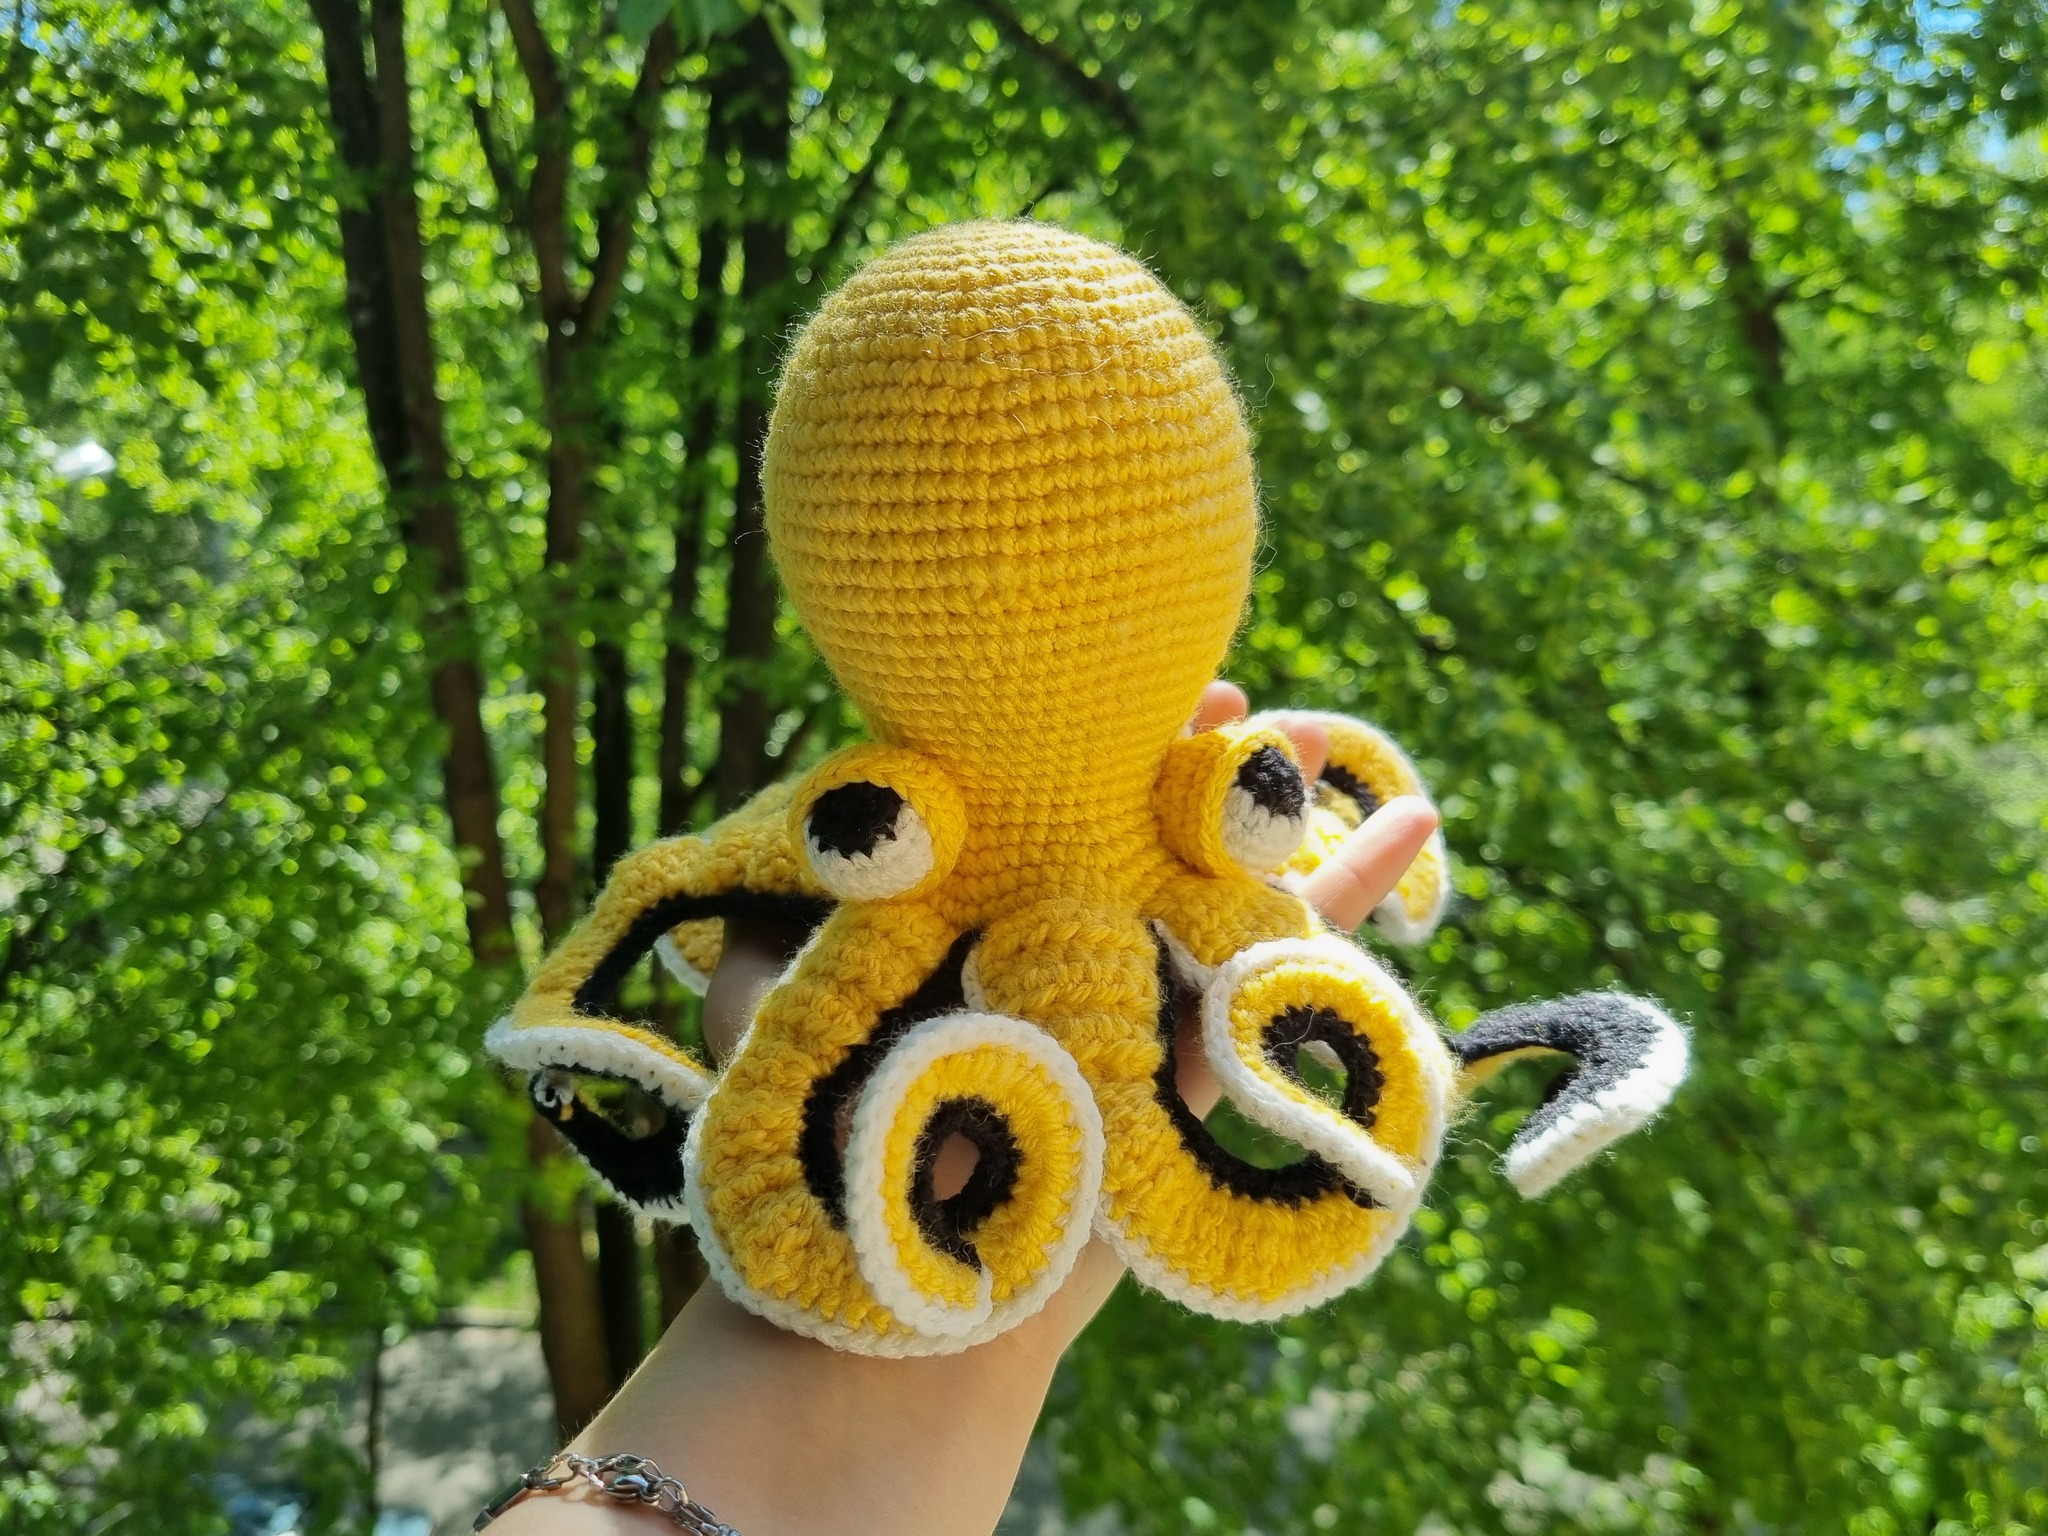 Simply Sunny Octopus - My, Knitting, Crochet, Amigurumi, Handmade, Toys, With your own hands, Needlework, Needlework without process, Creation, Yarn, Hook, Octopus, Soft toy, Presents, Hobby, Work, Longpost